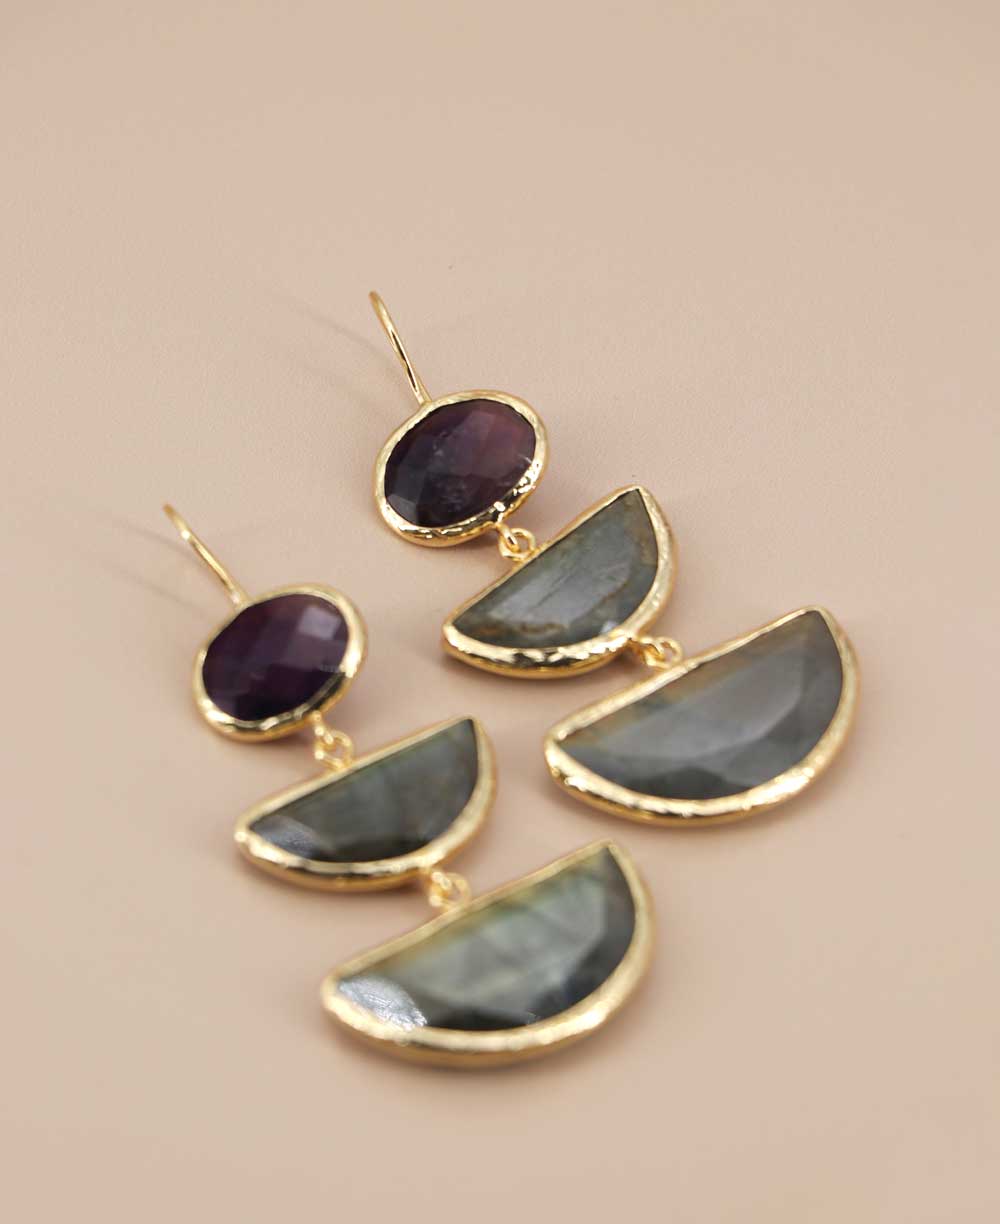 Dangling earrings with amethyst and moon-shaped labradorite